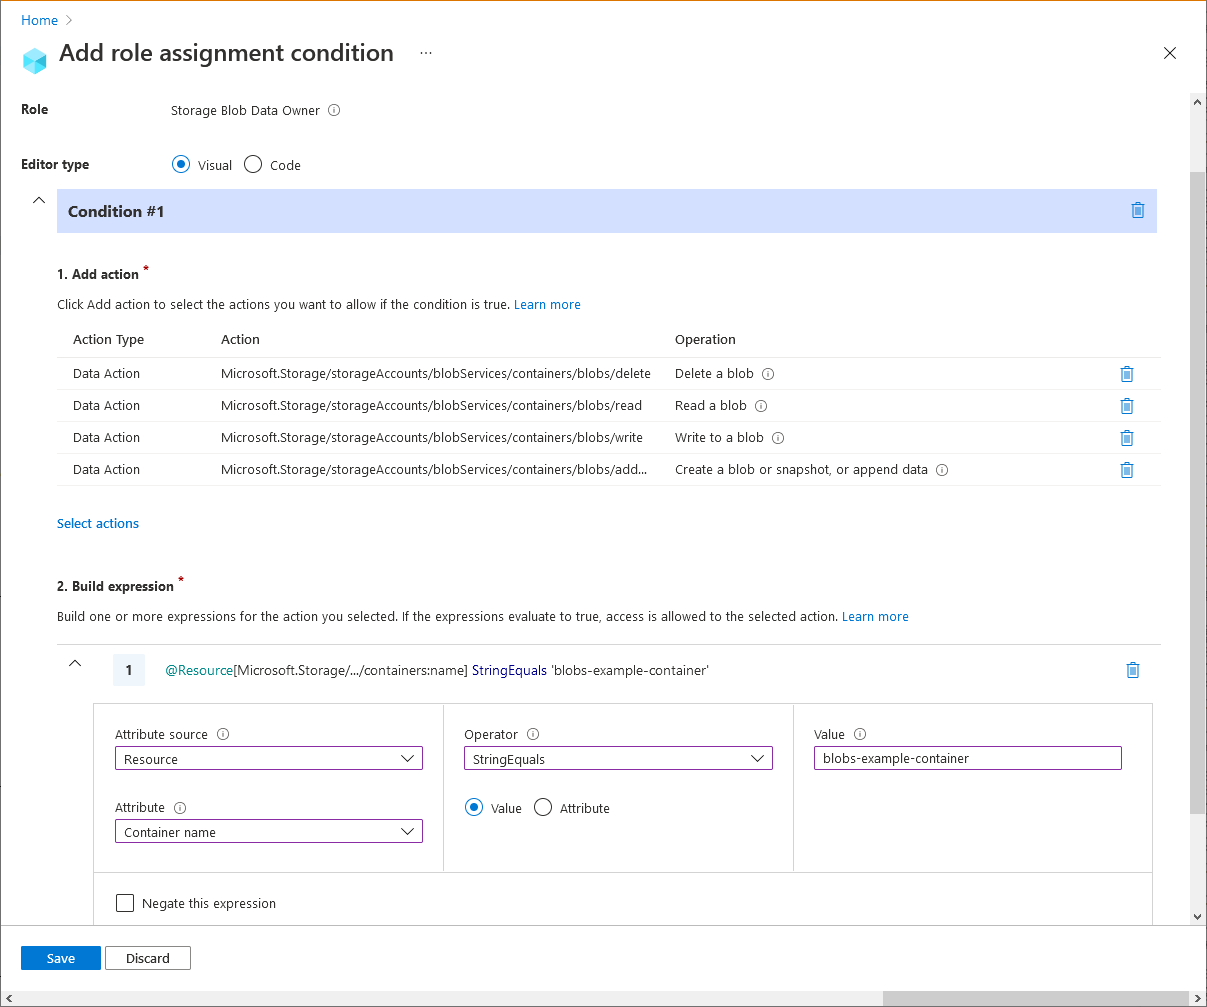 Screenshot of example 5 condition 1 editor in Azure portal.